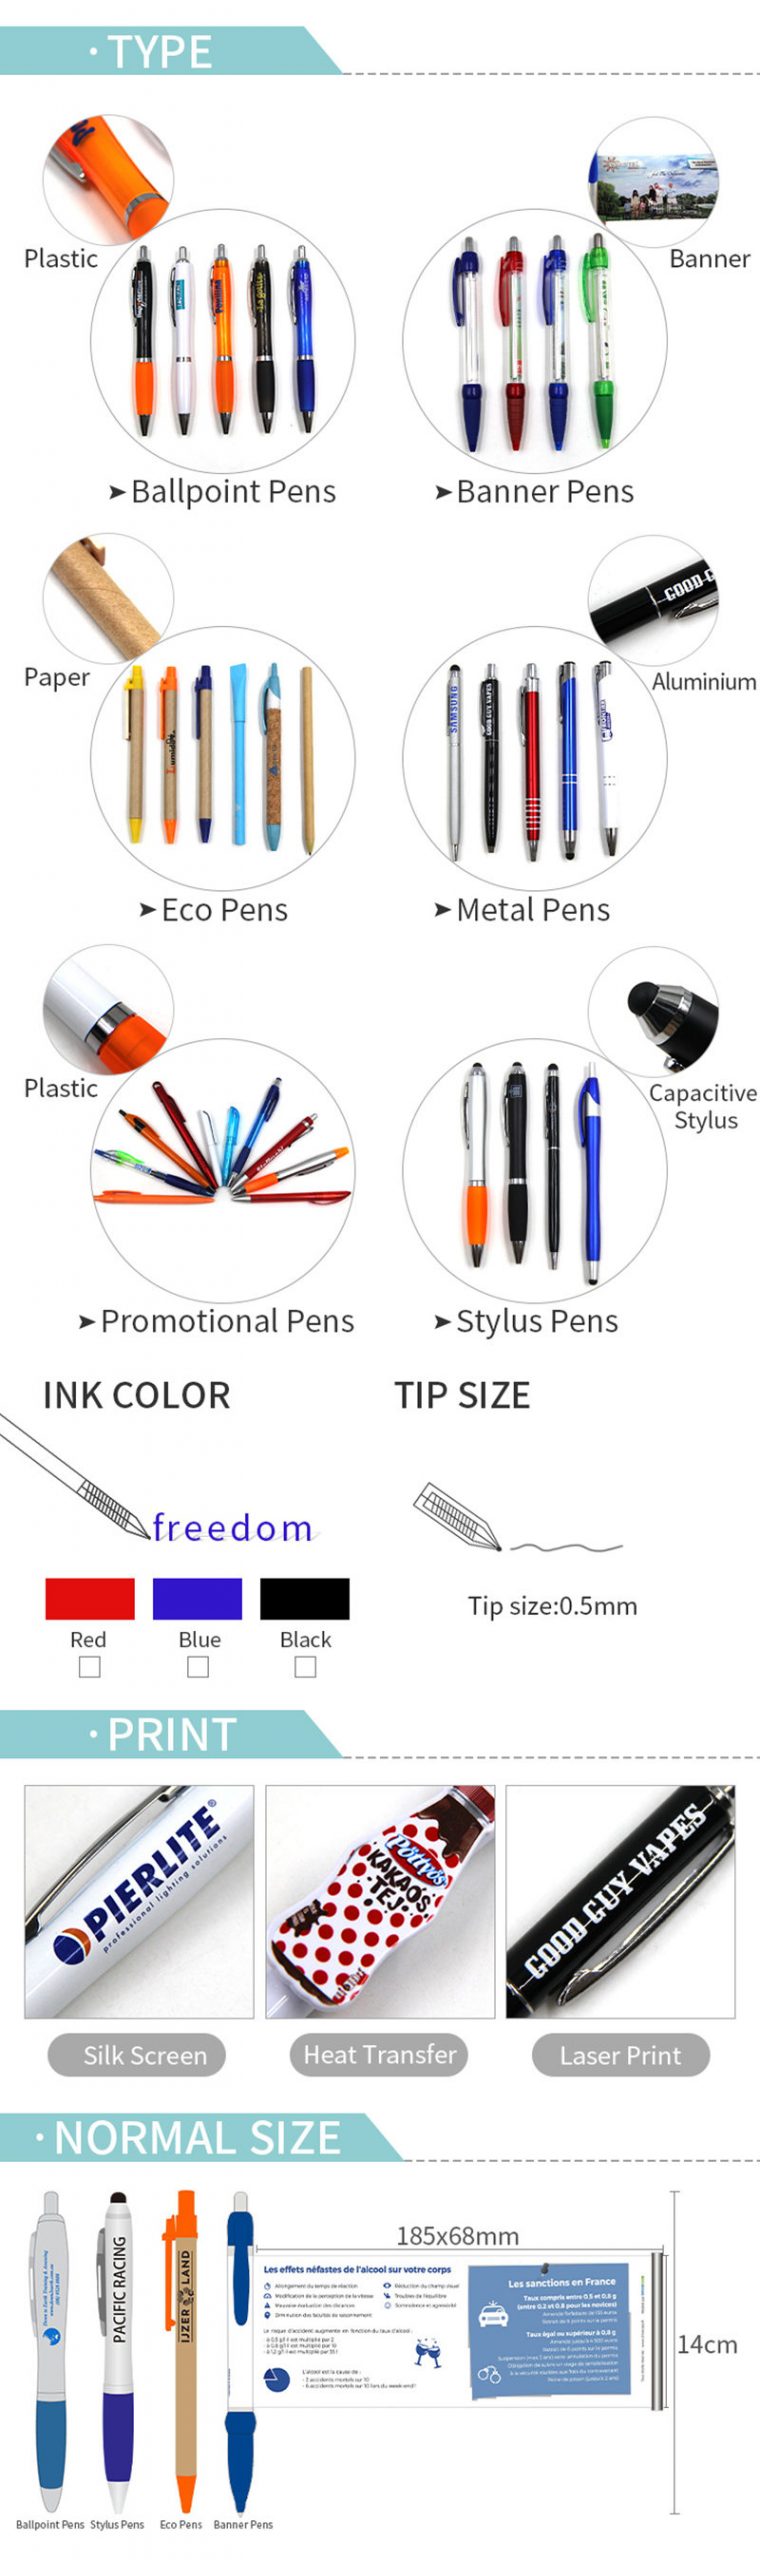 How to choose your best pen manufacturer